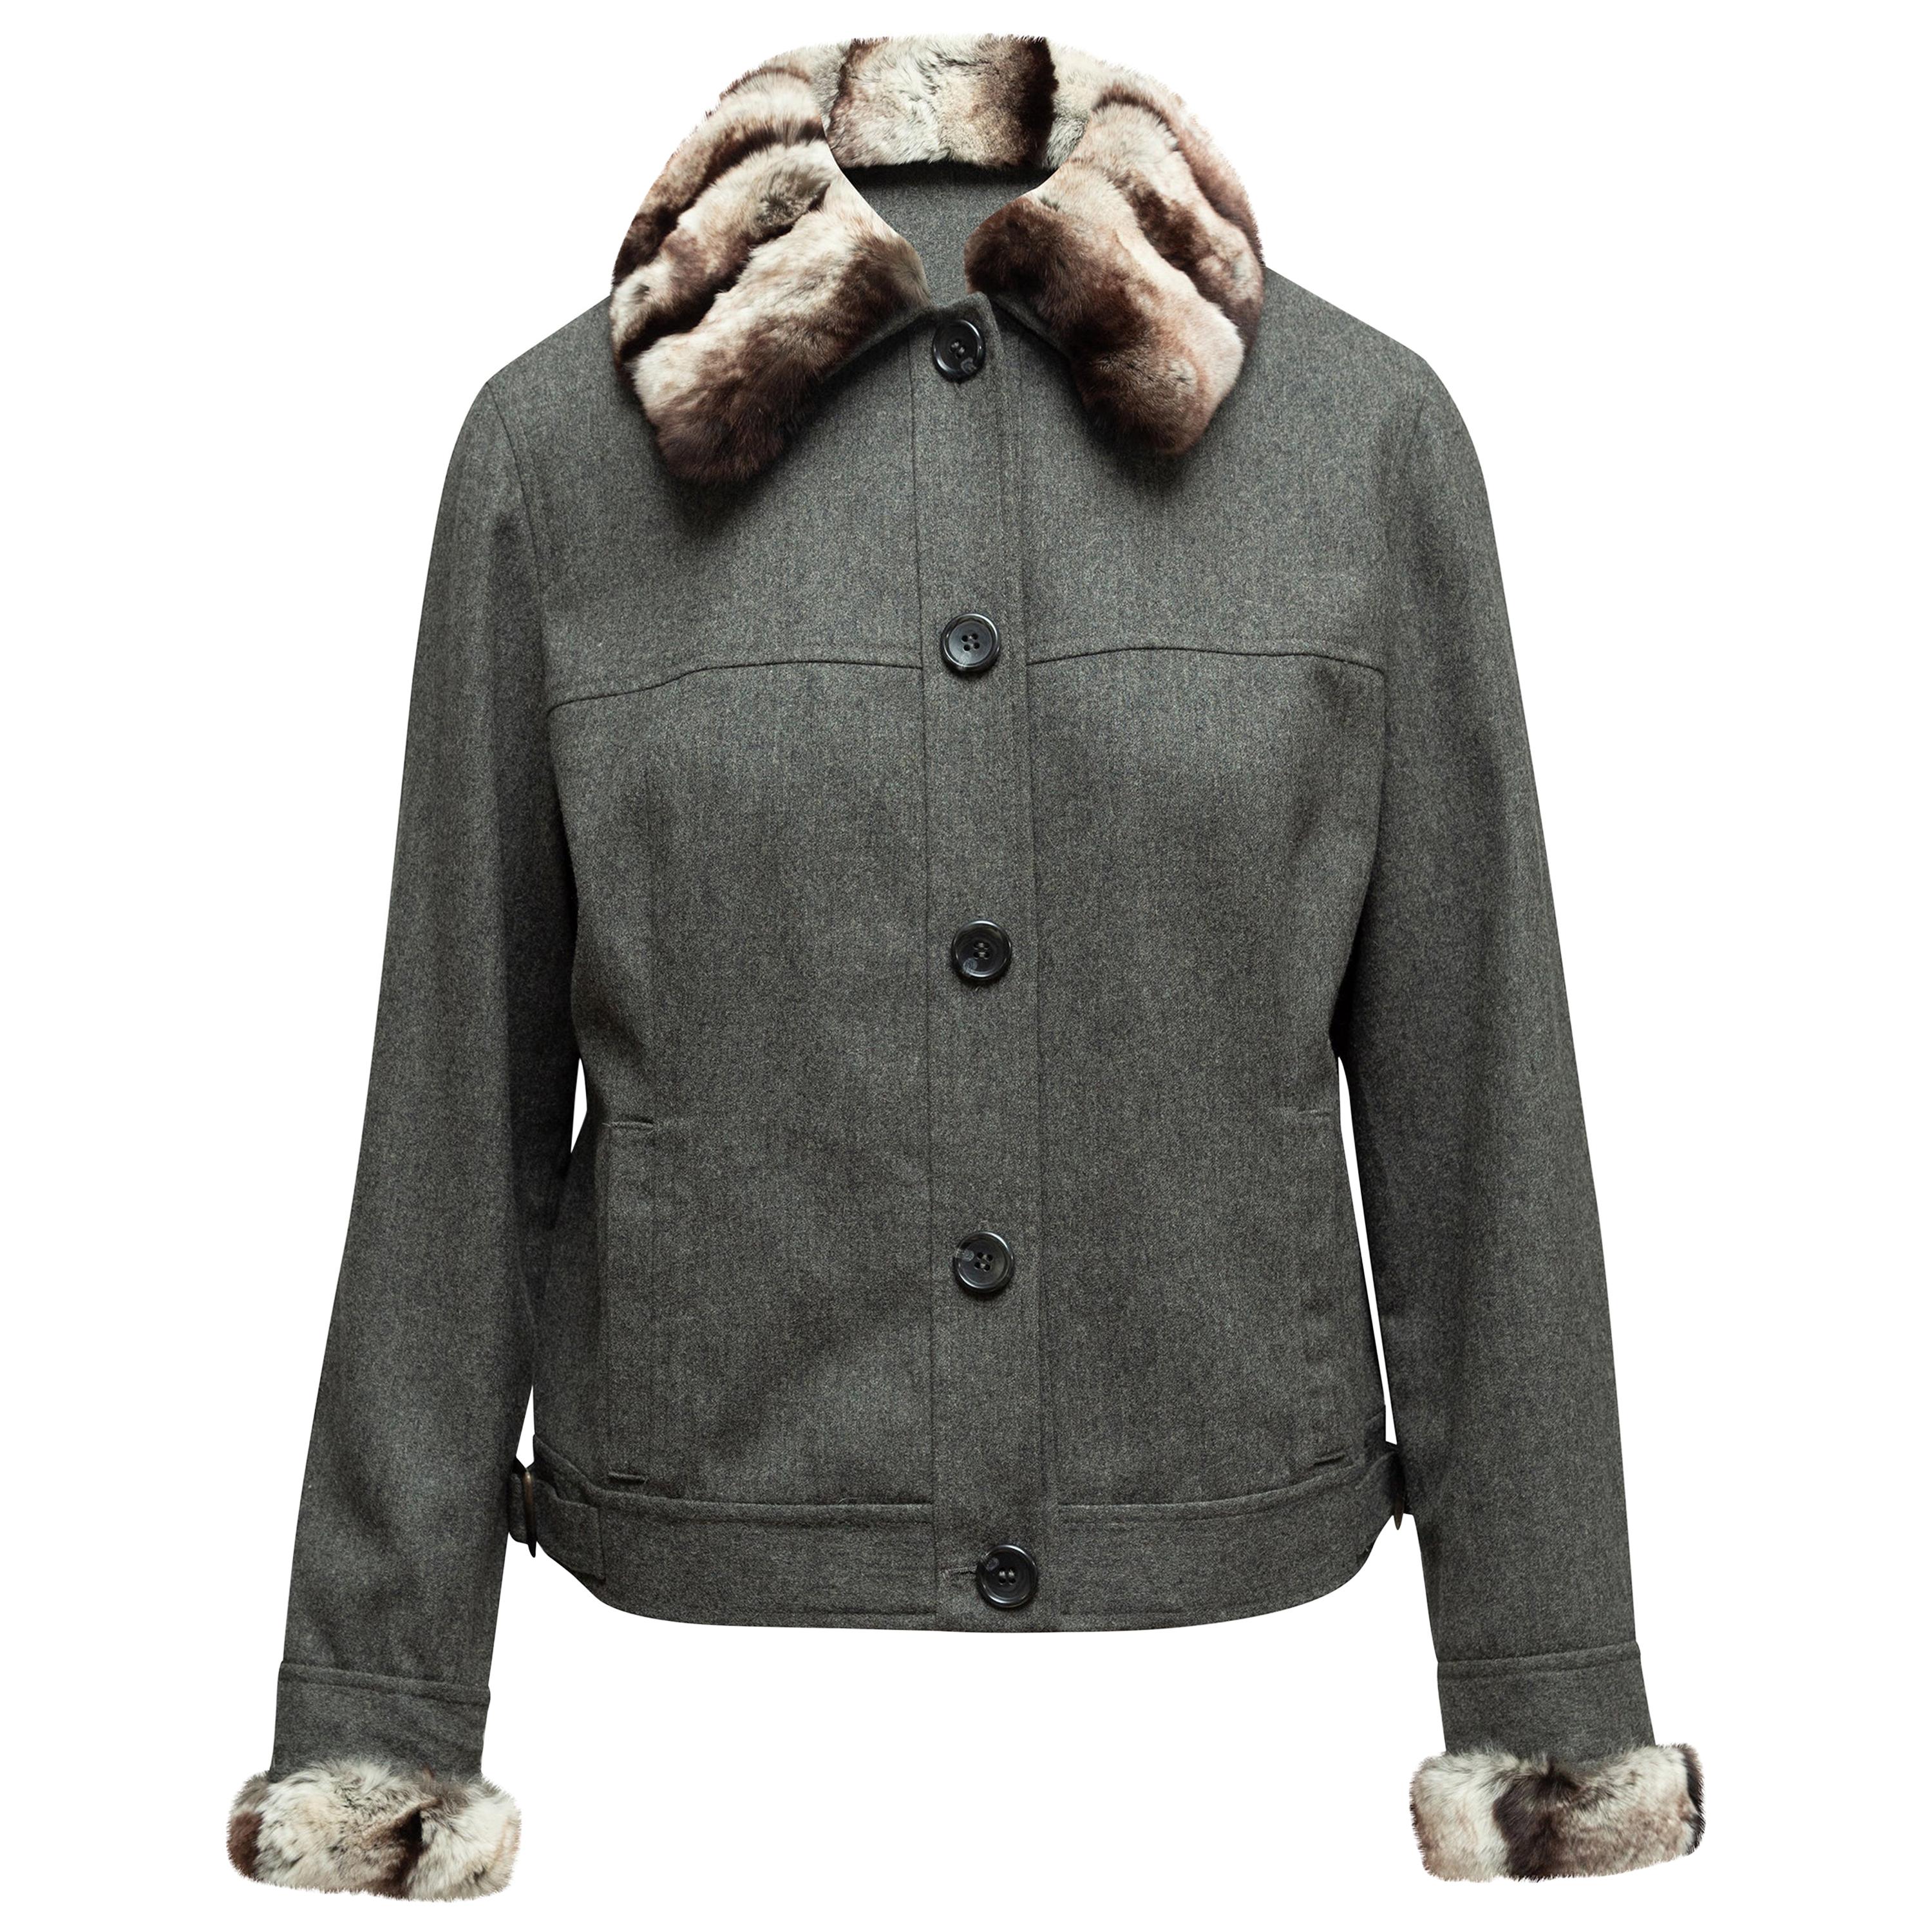 Magaschoni Grey Cashmere & Wool Fur-Trimmed Jacket